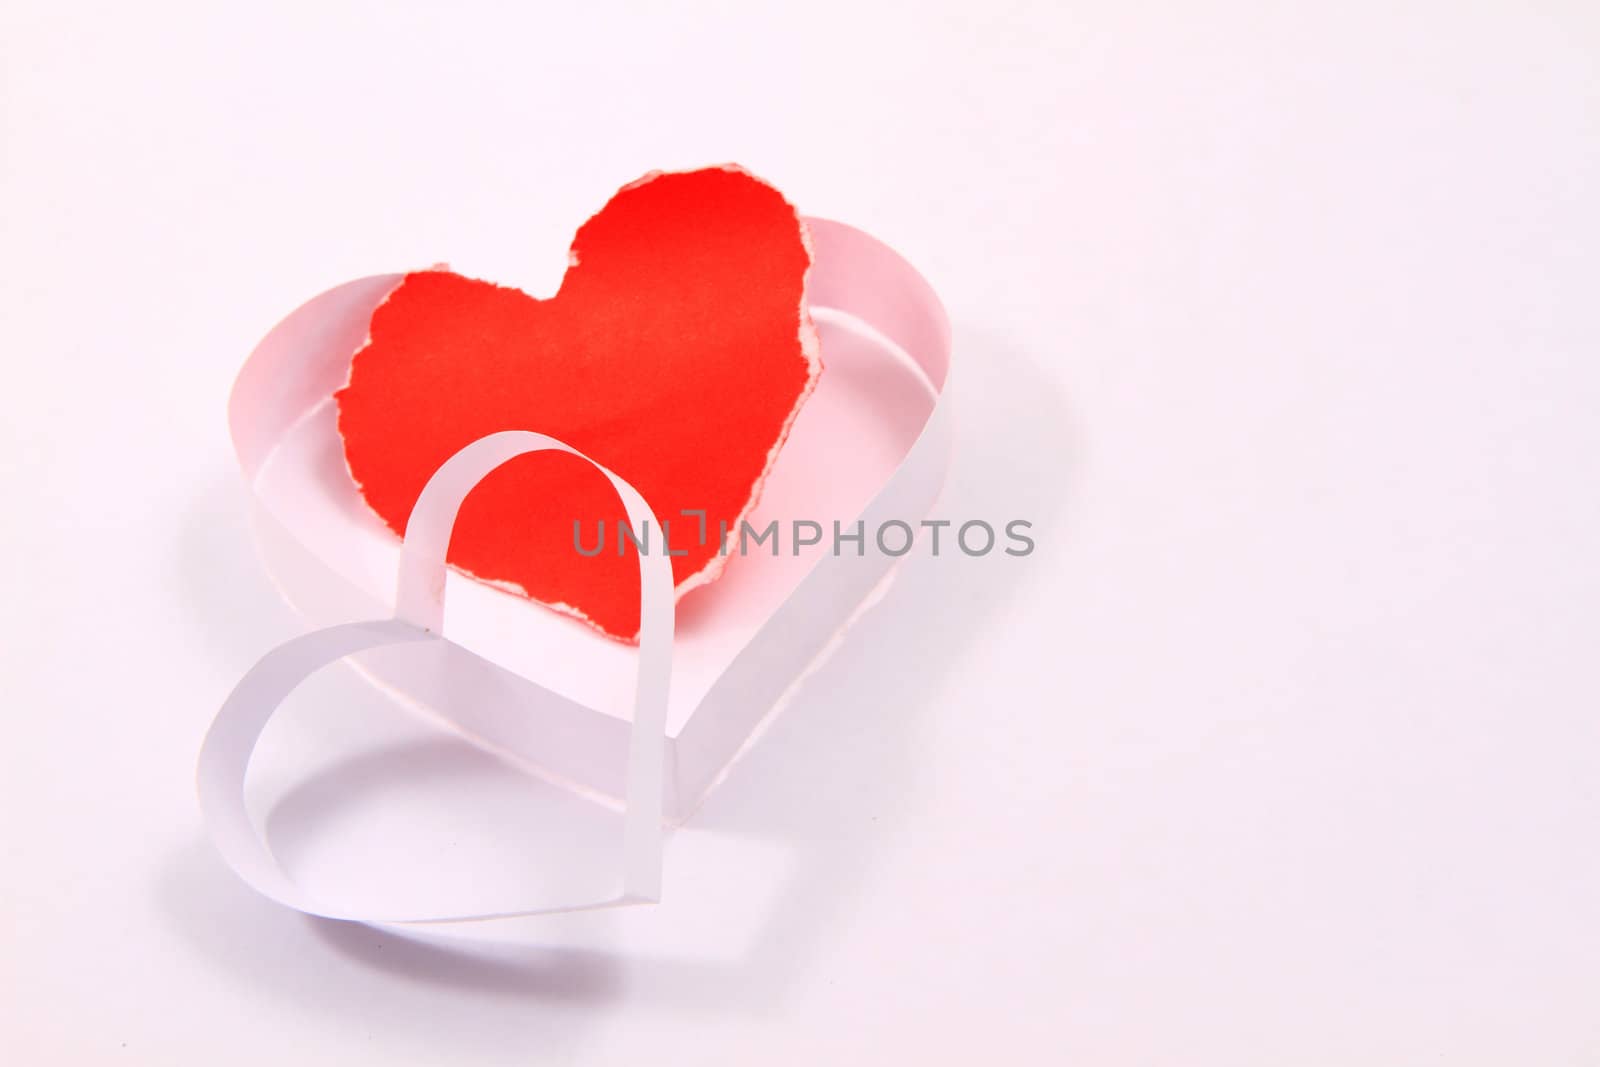 Paper hearts on white background